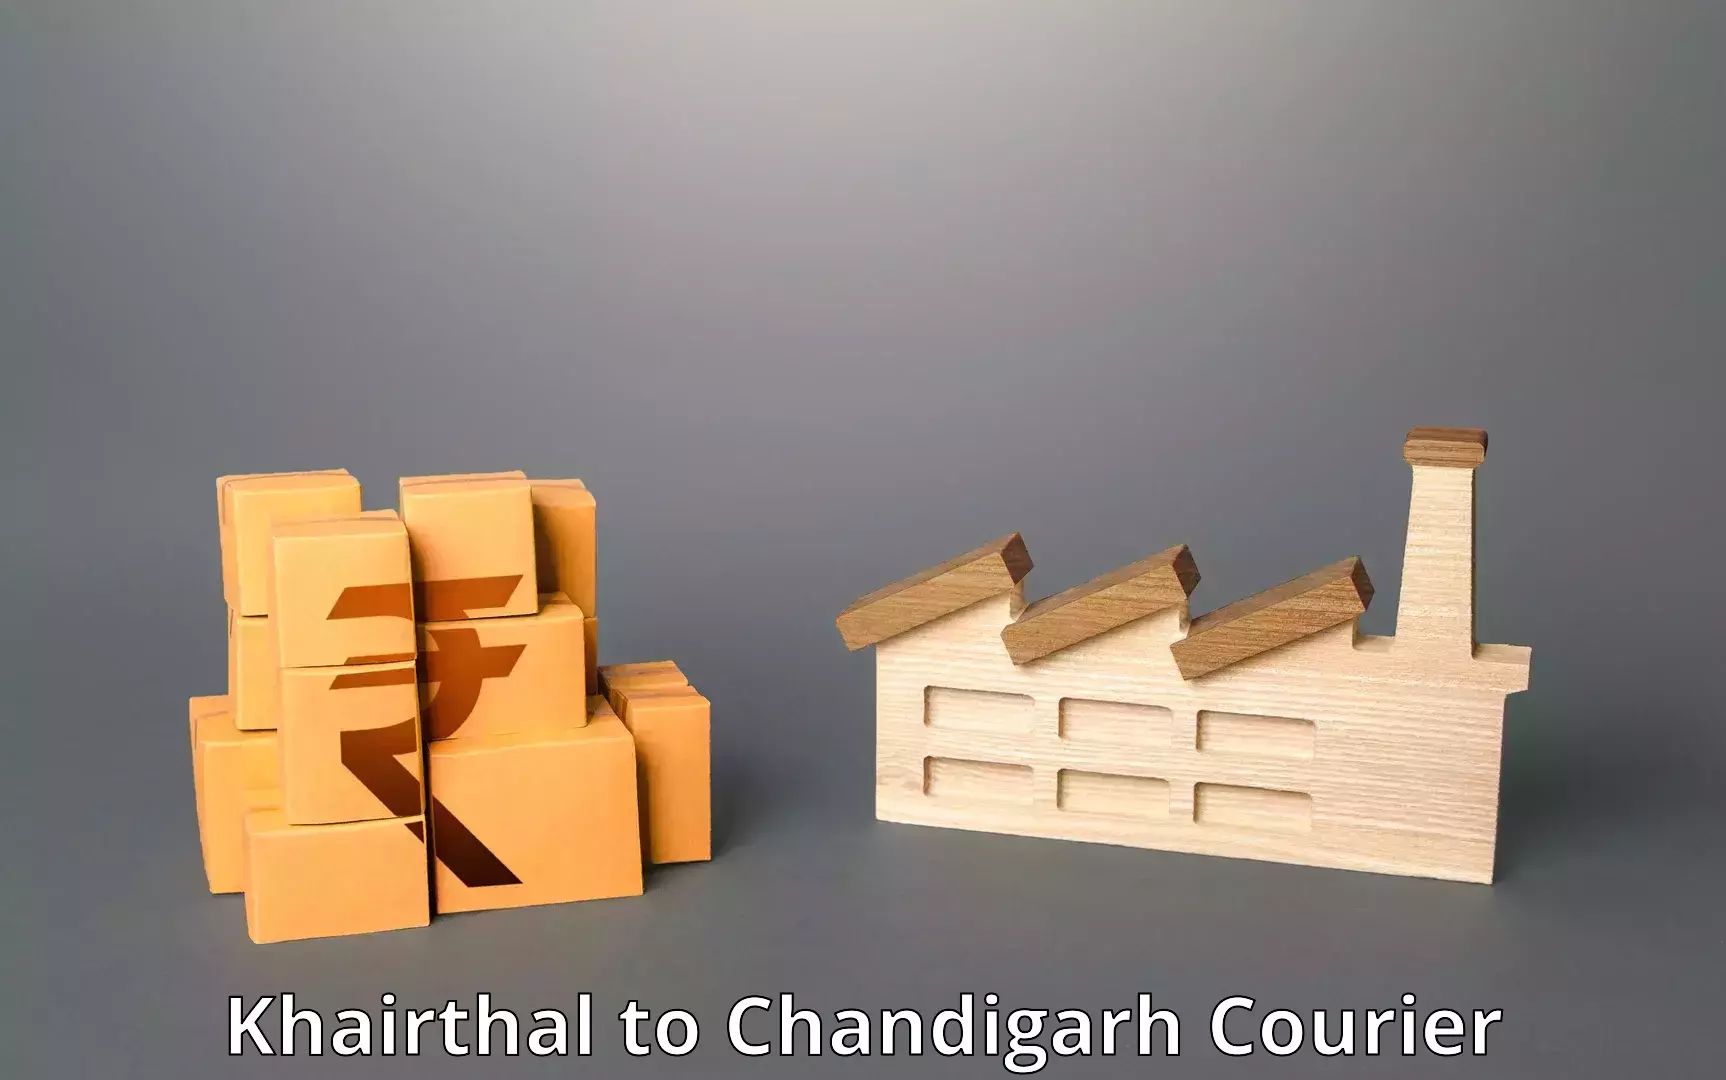 Global shipping solutions Khairthal to Chandigarh